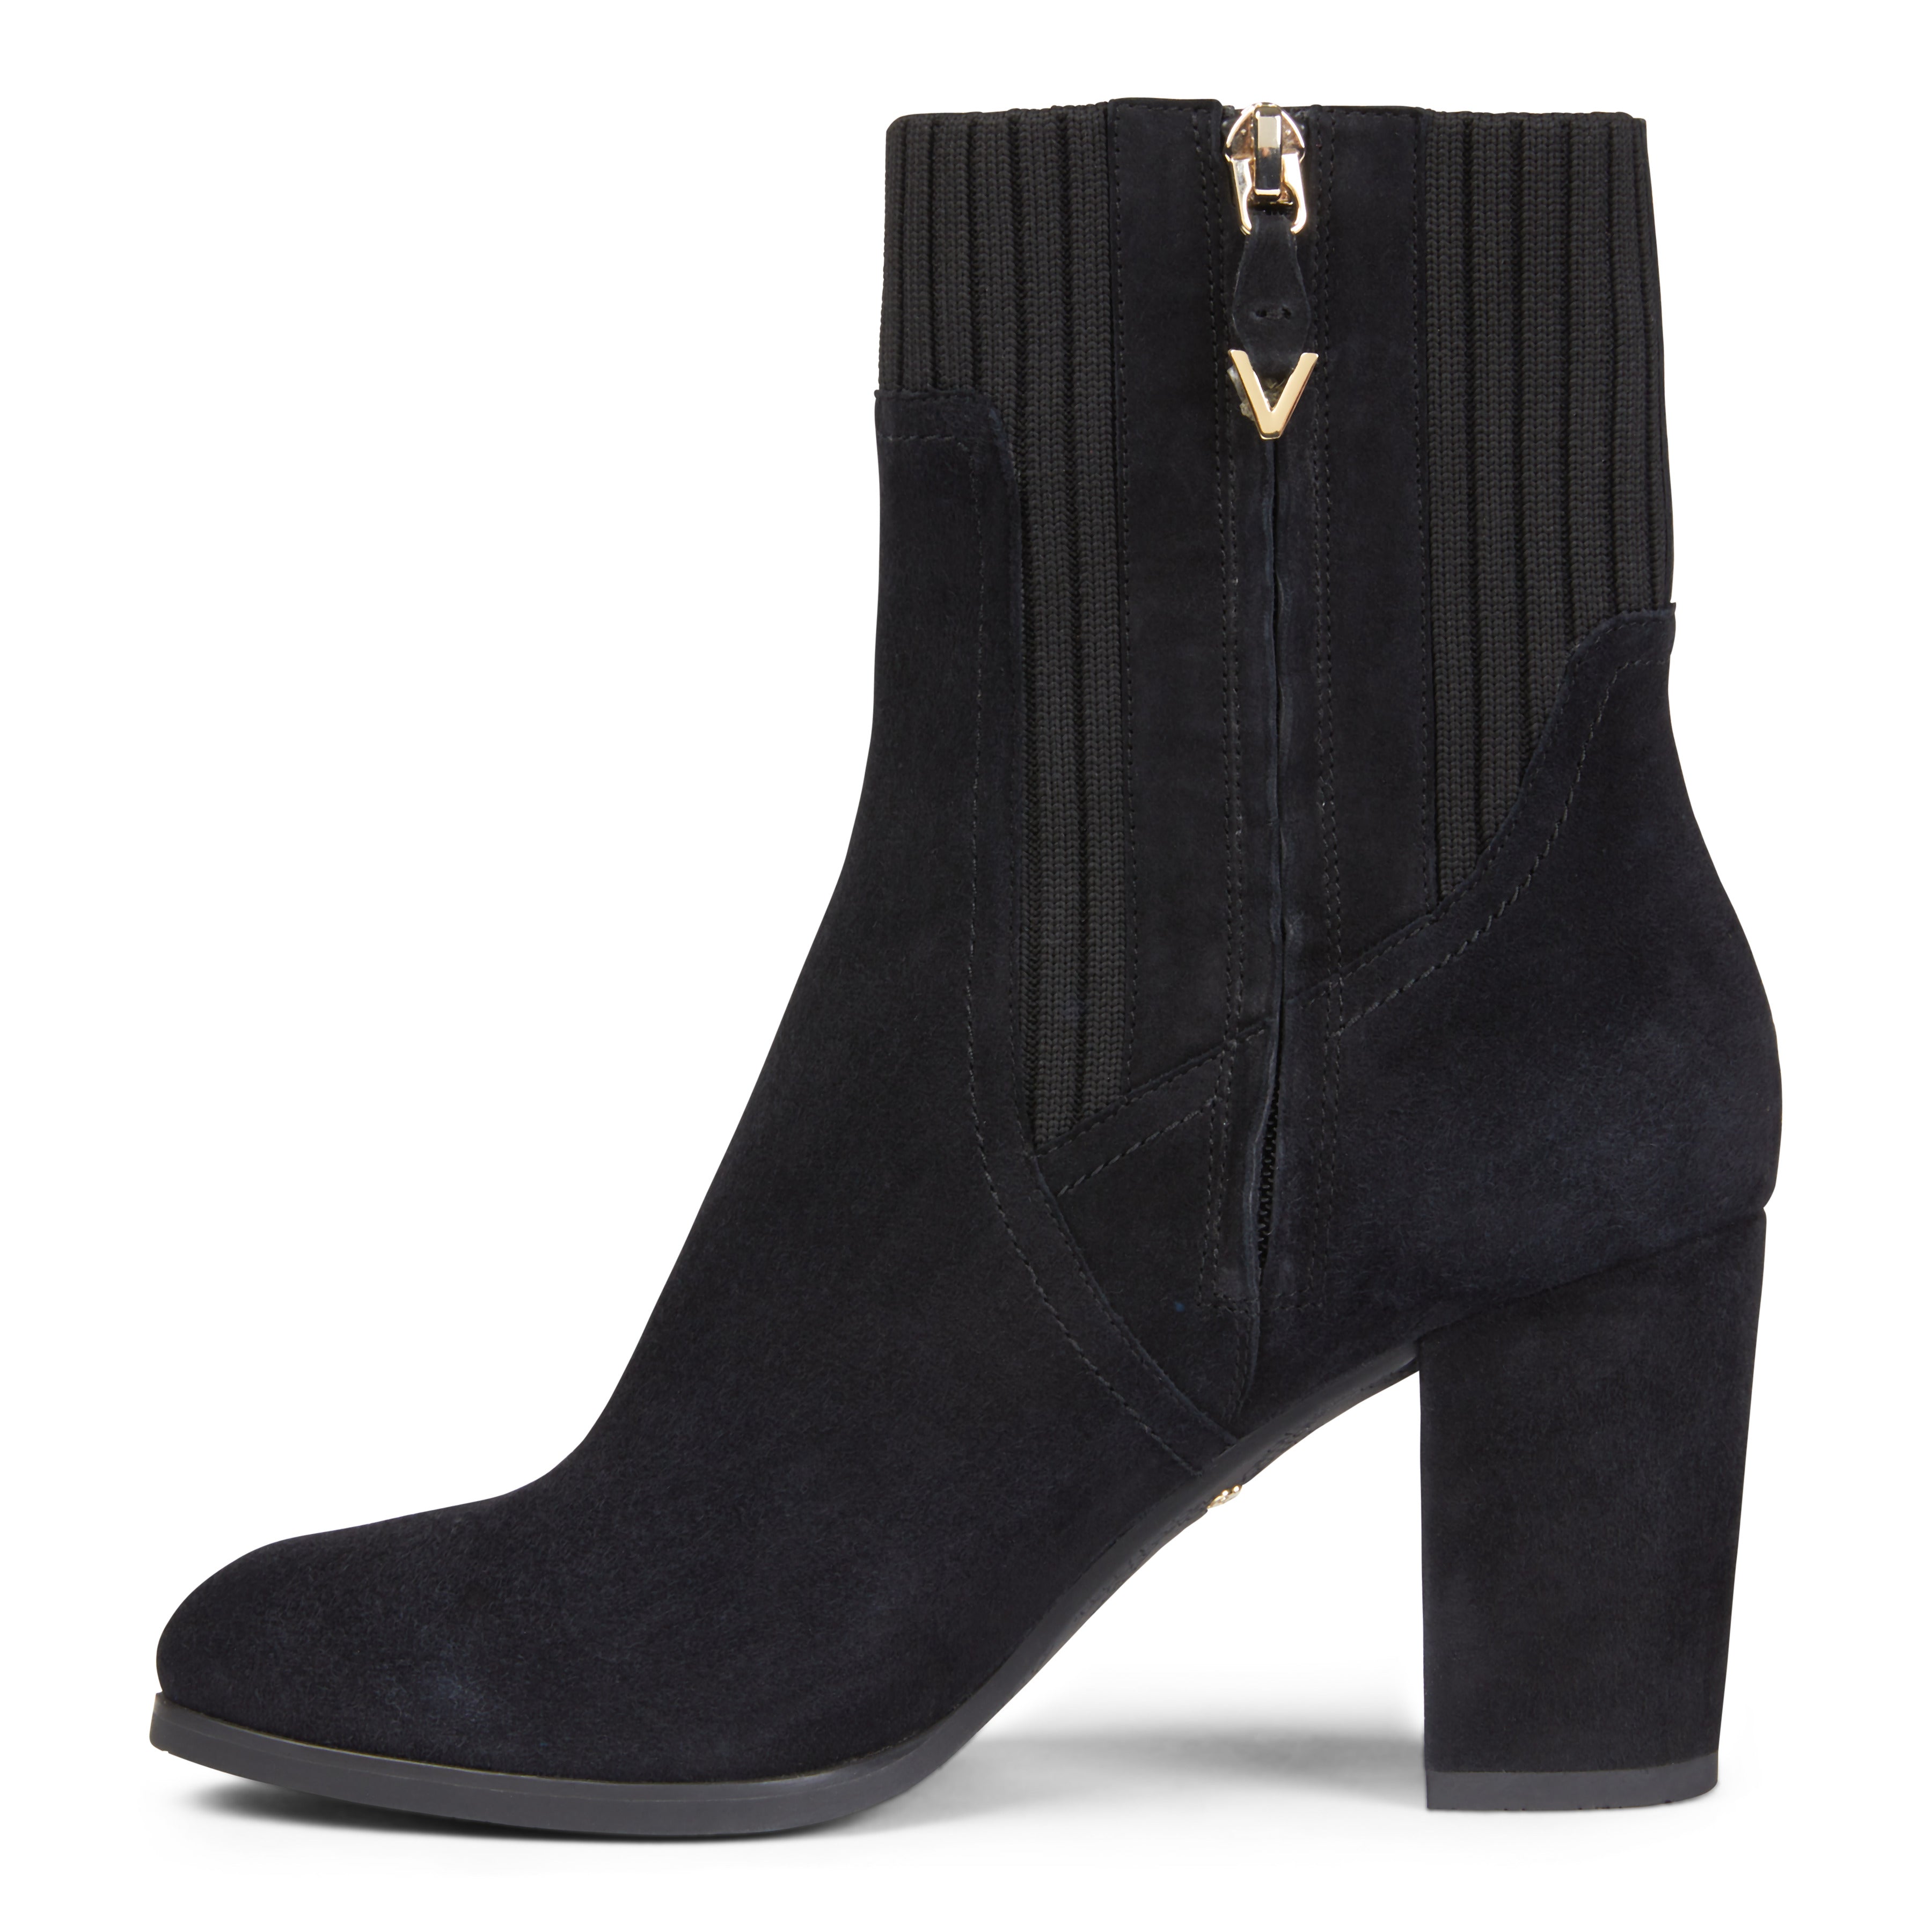 Kaylee Ankle Boot  Vionic Shoes Canada